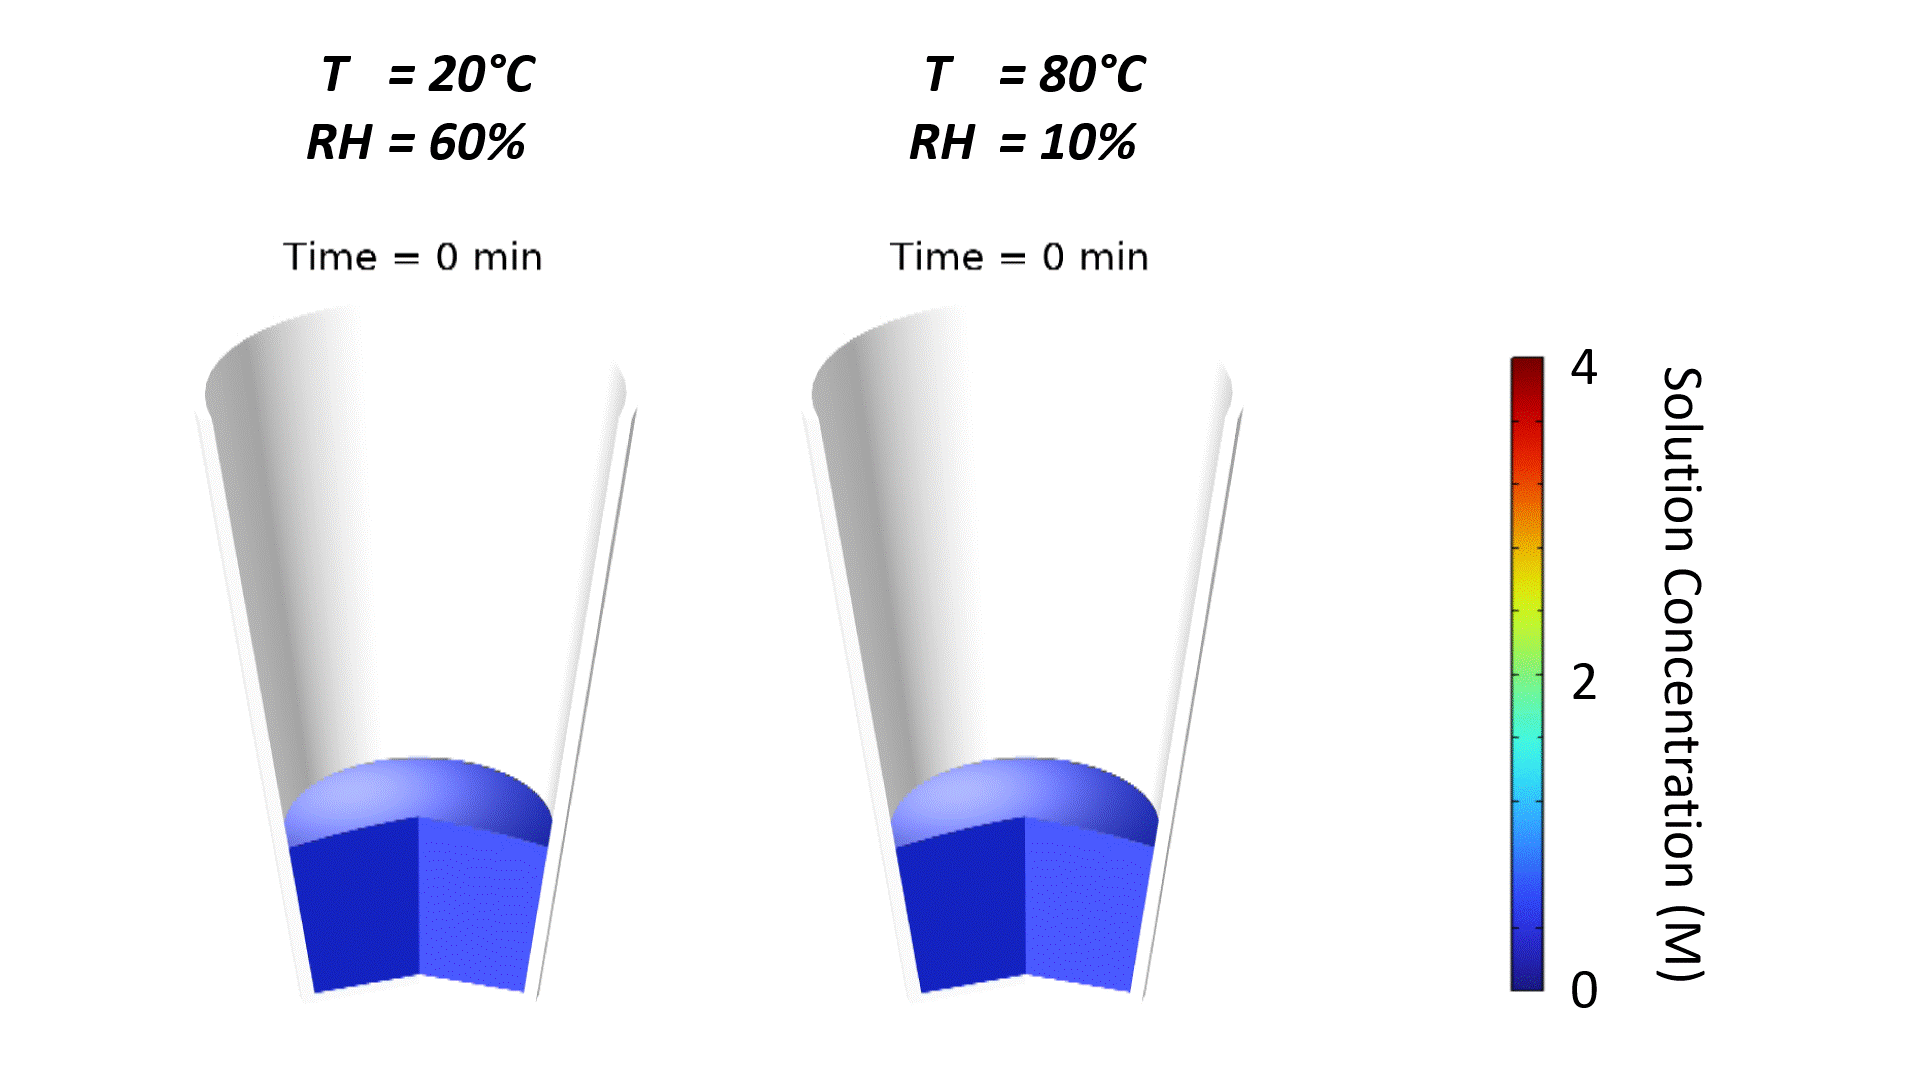 Animations of simulated reagent dry-down under different ambient conditions.